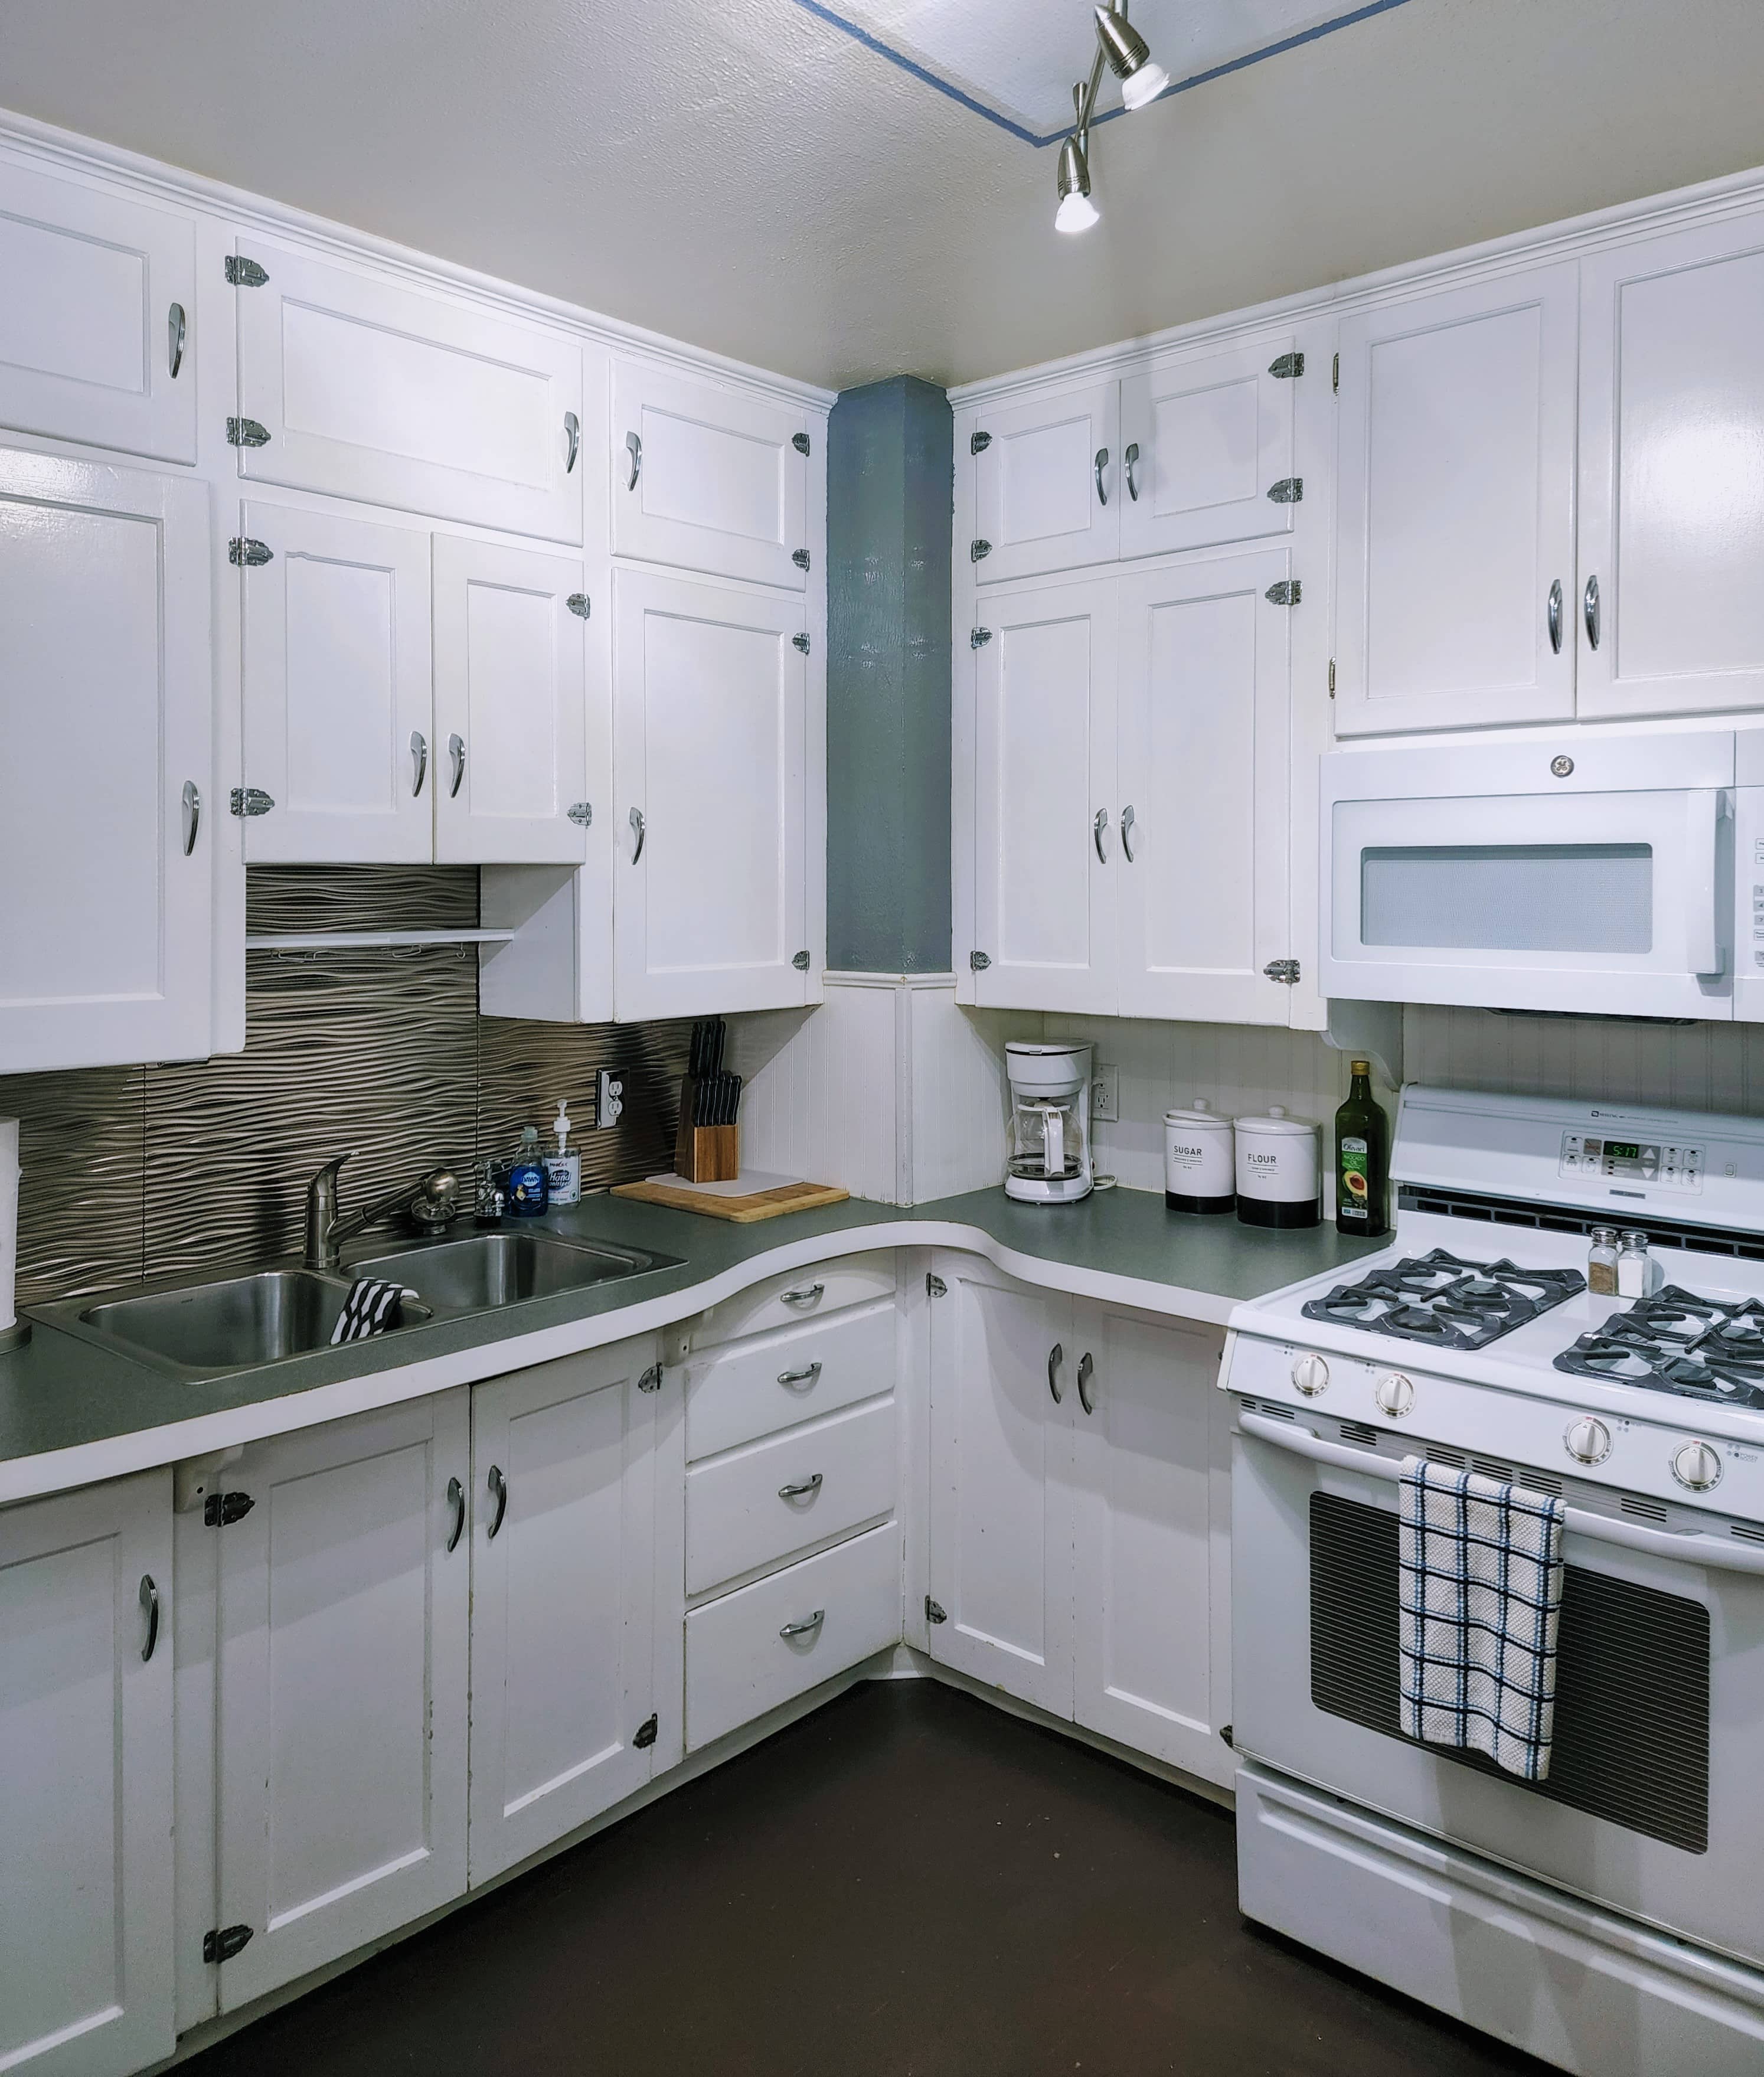 Kitchen with white and green appliances